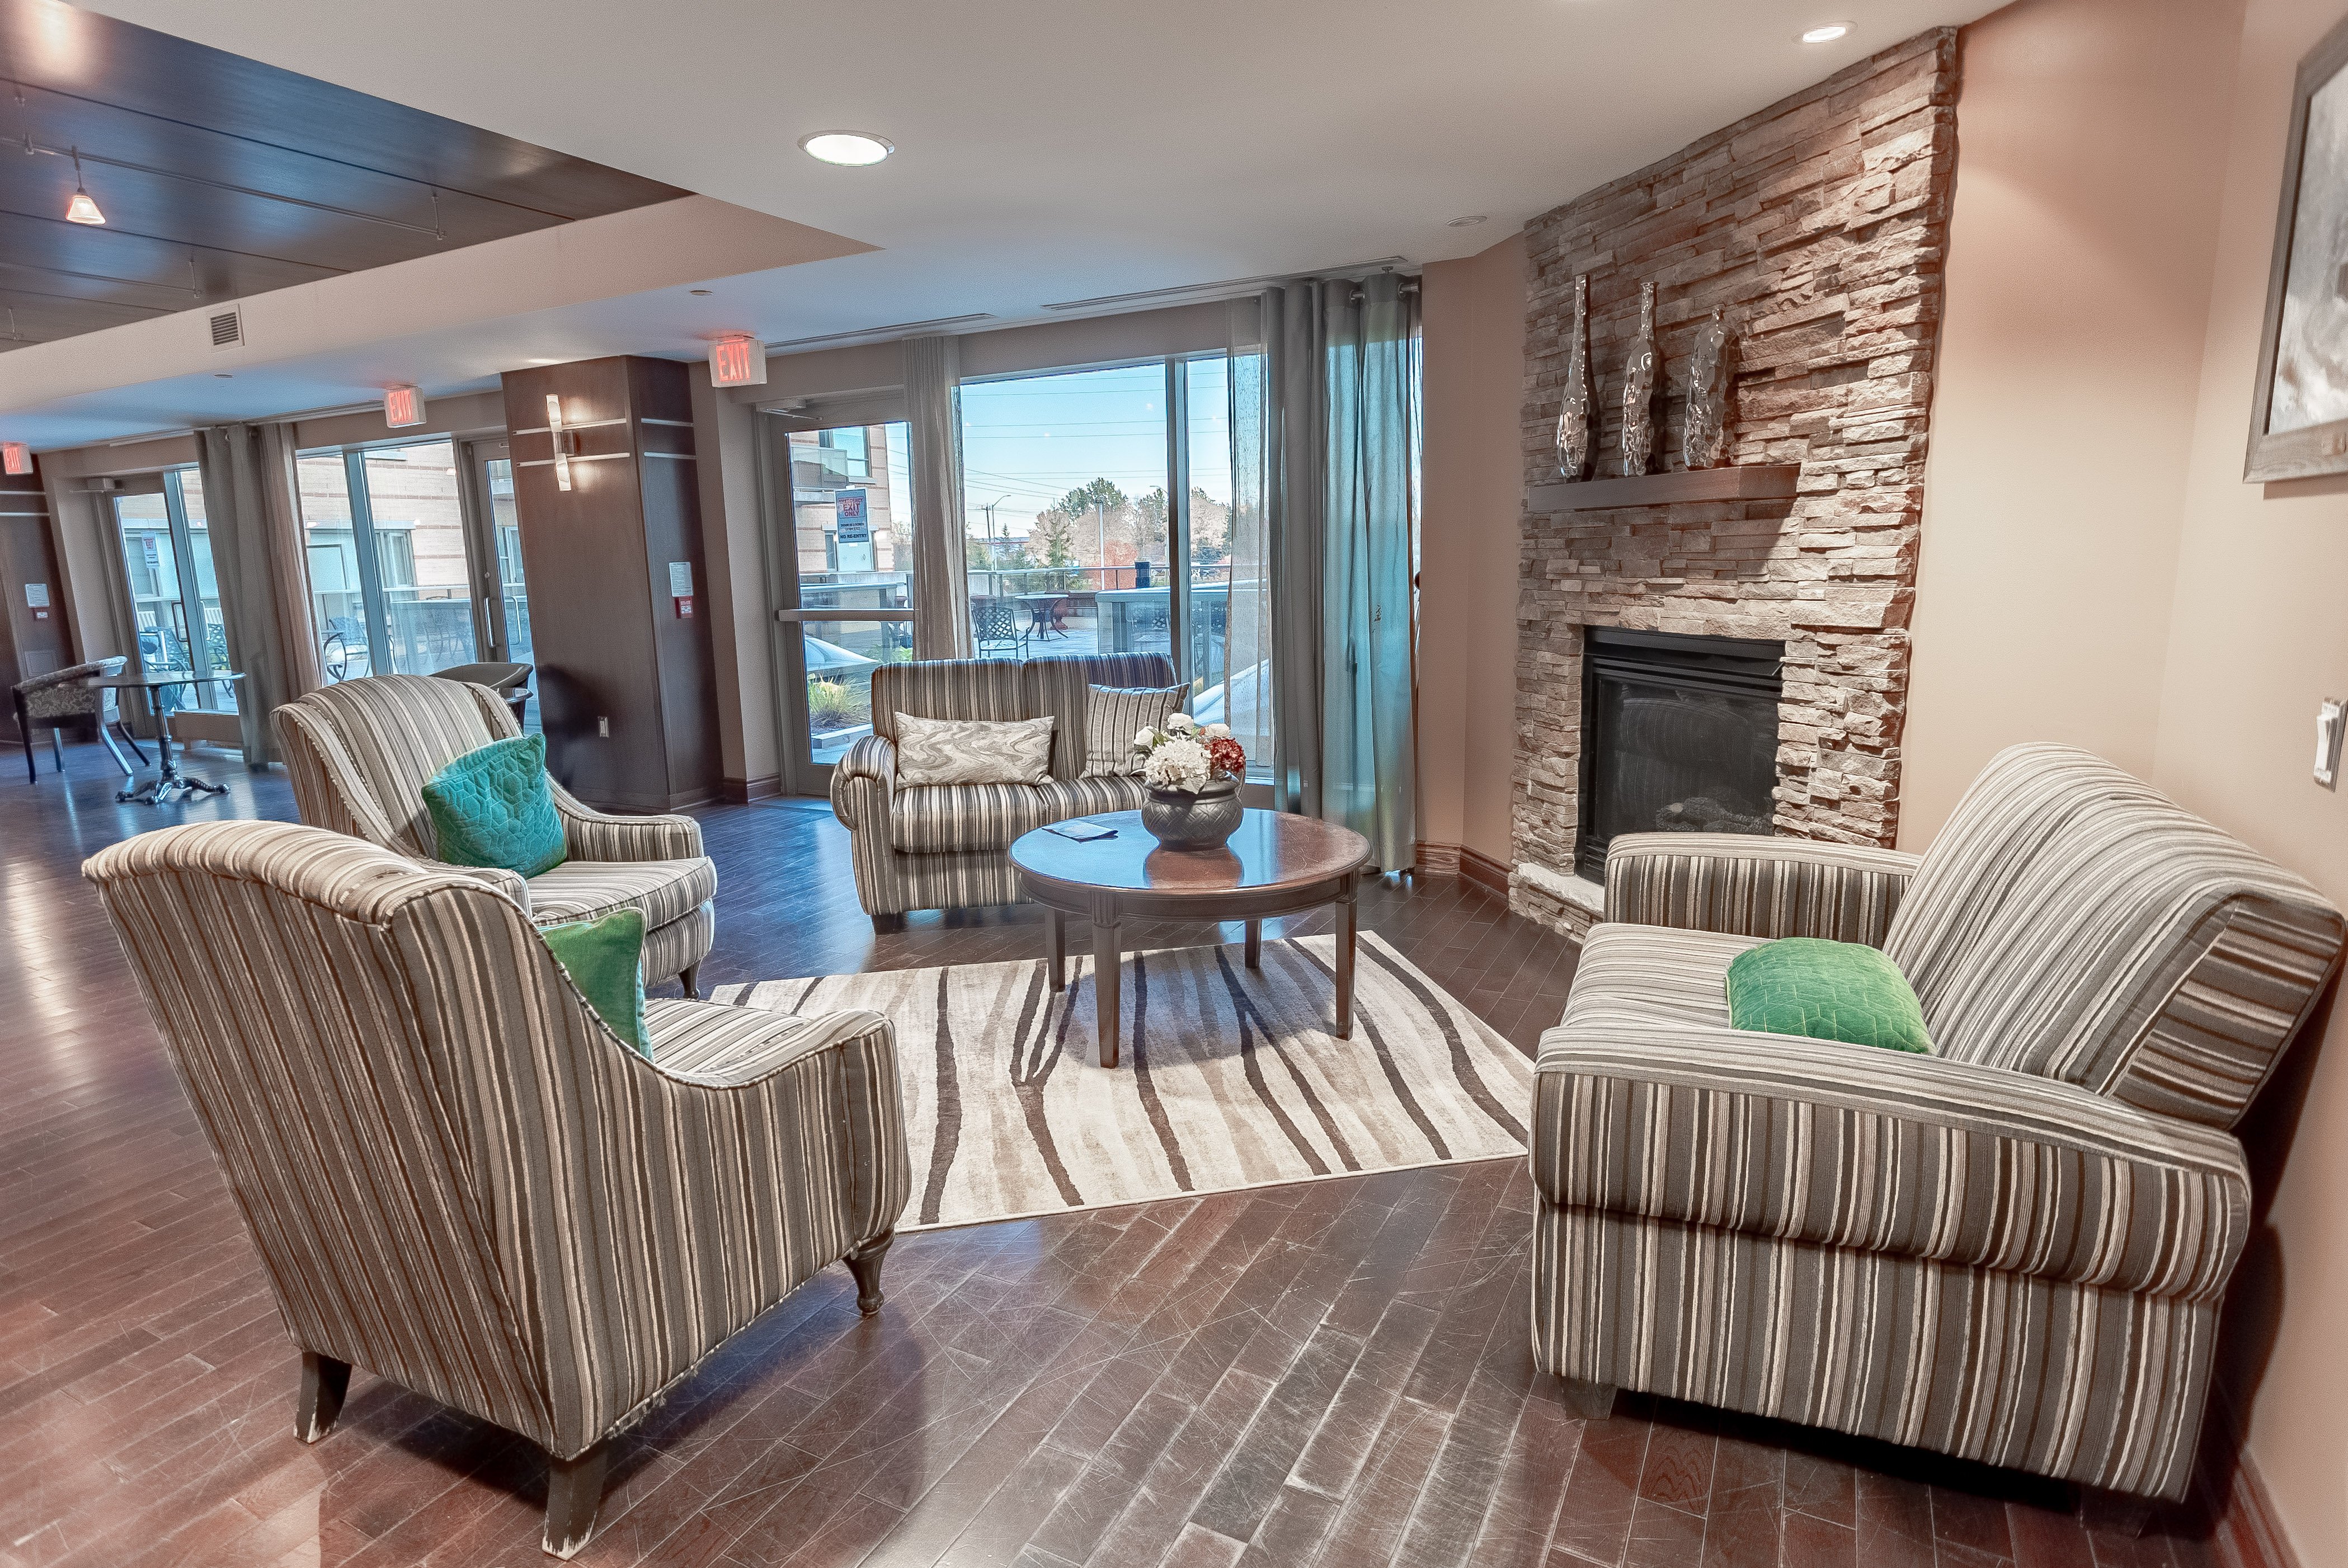 Seating area around the fireplace at Royale Place Retirement Residence